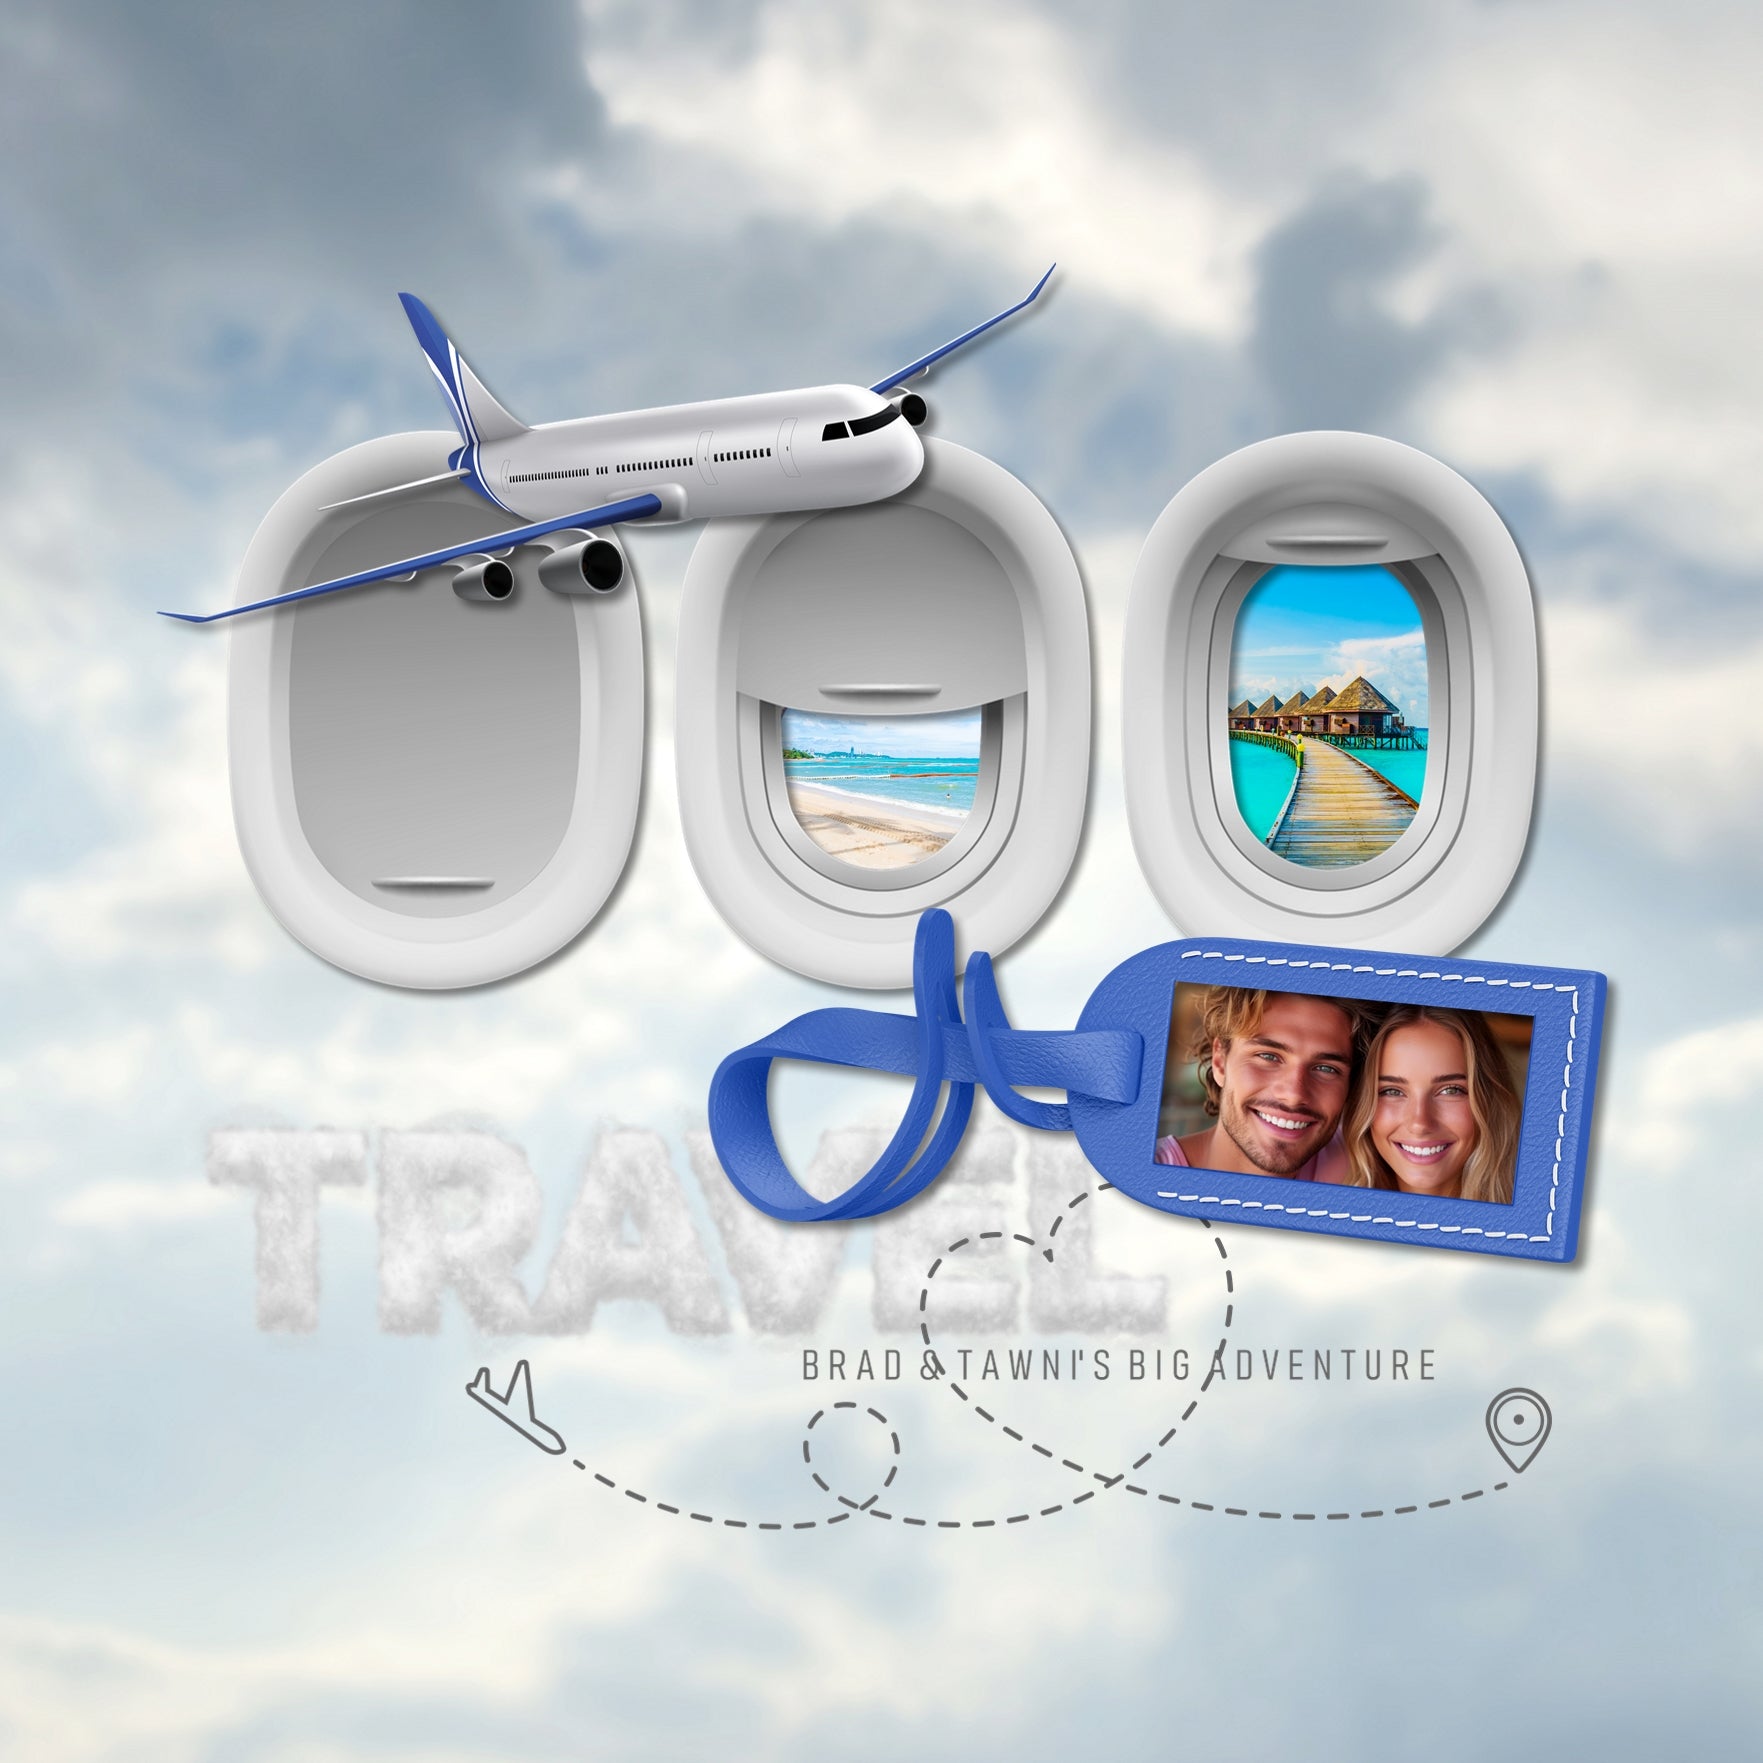 Create your own digital scrapbooking titles and aviation word art with these puffy white cloud alphabet letters, numbers, and punctuation by Lucky Girl Creative digital art that are perfect for any vacation air travel, air show, flight attendants, or hobbyist flight simulation. Great for aviation digital pages featuring the outdoors and nature, too!